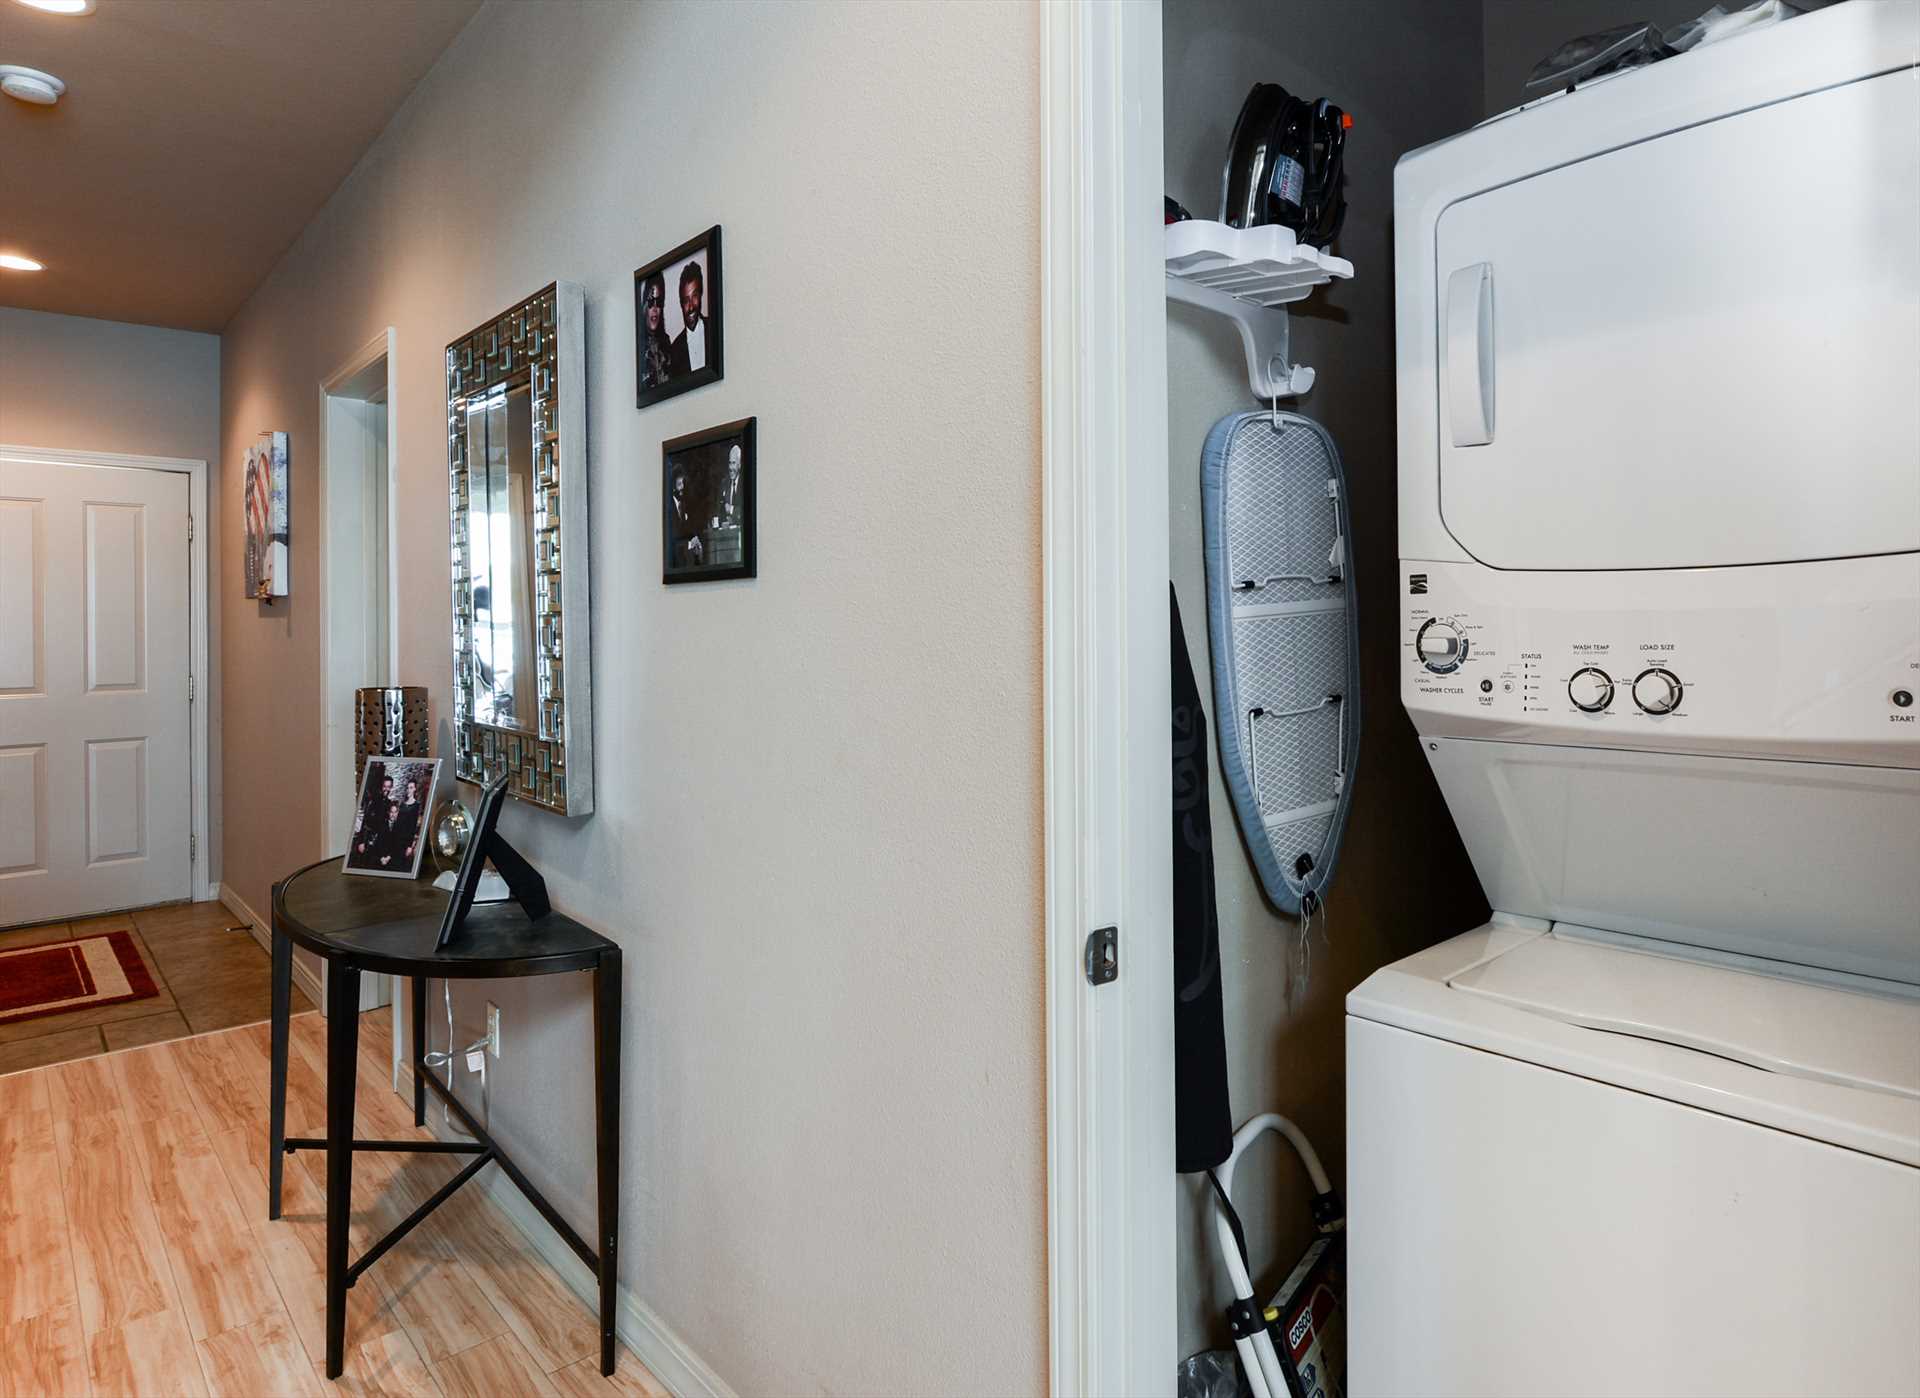 This unit includes a washer and dryer.